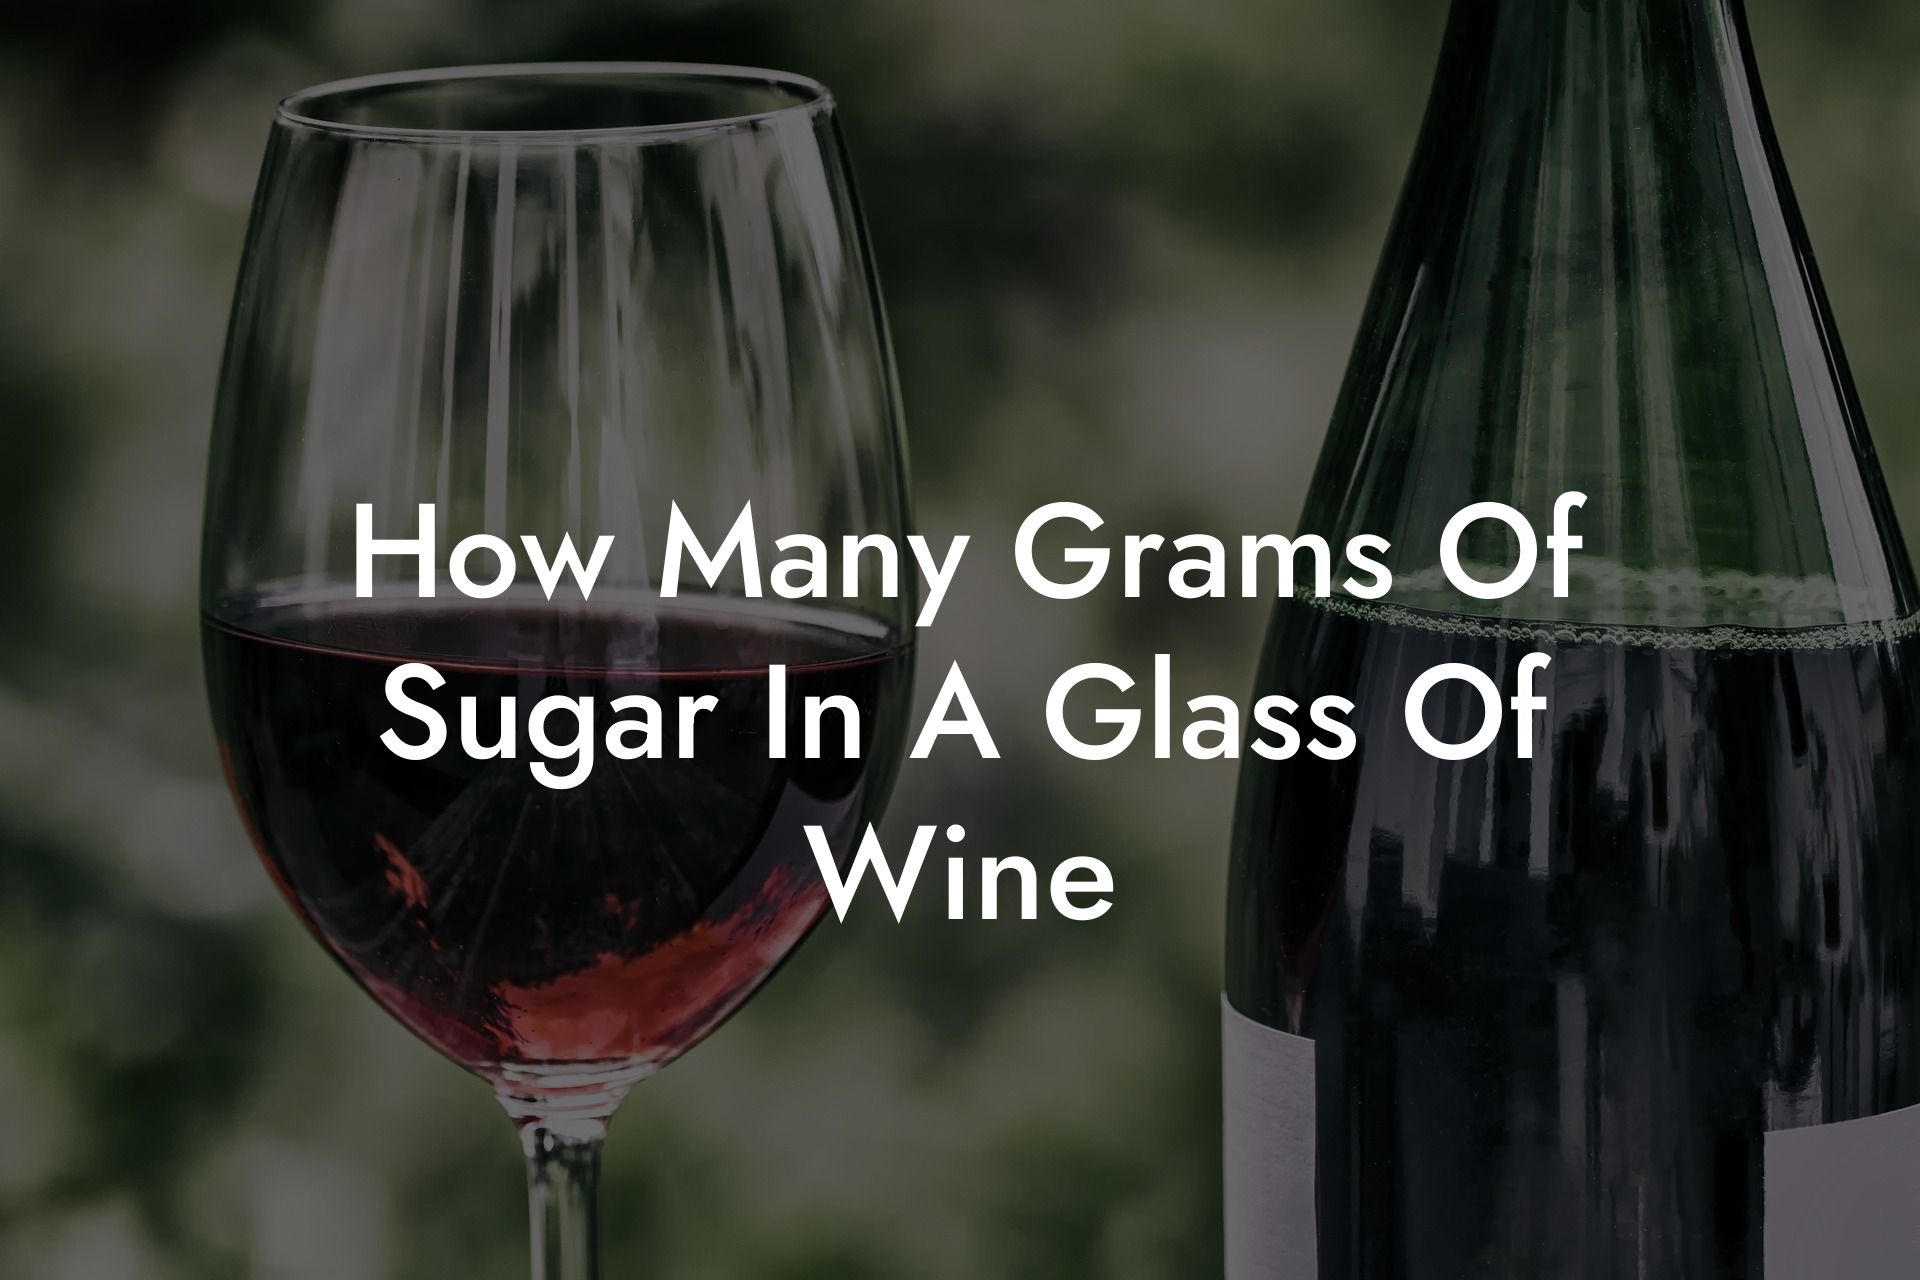 How Many Grams Of Sugar In A Glass Of Wine